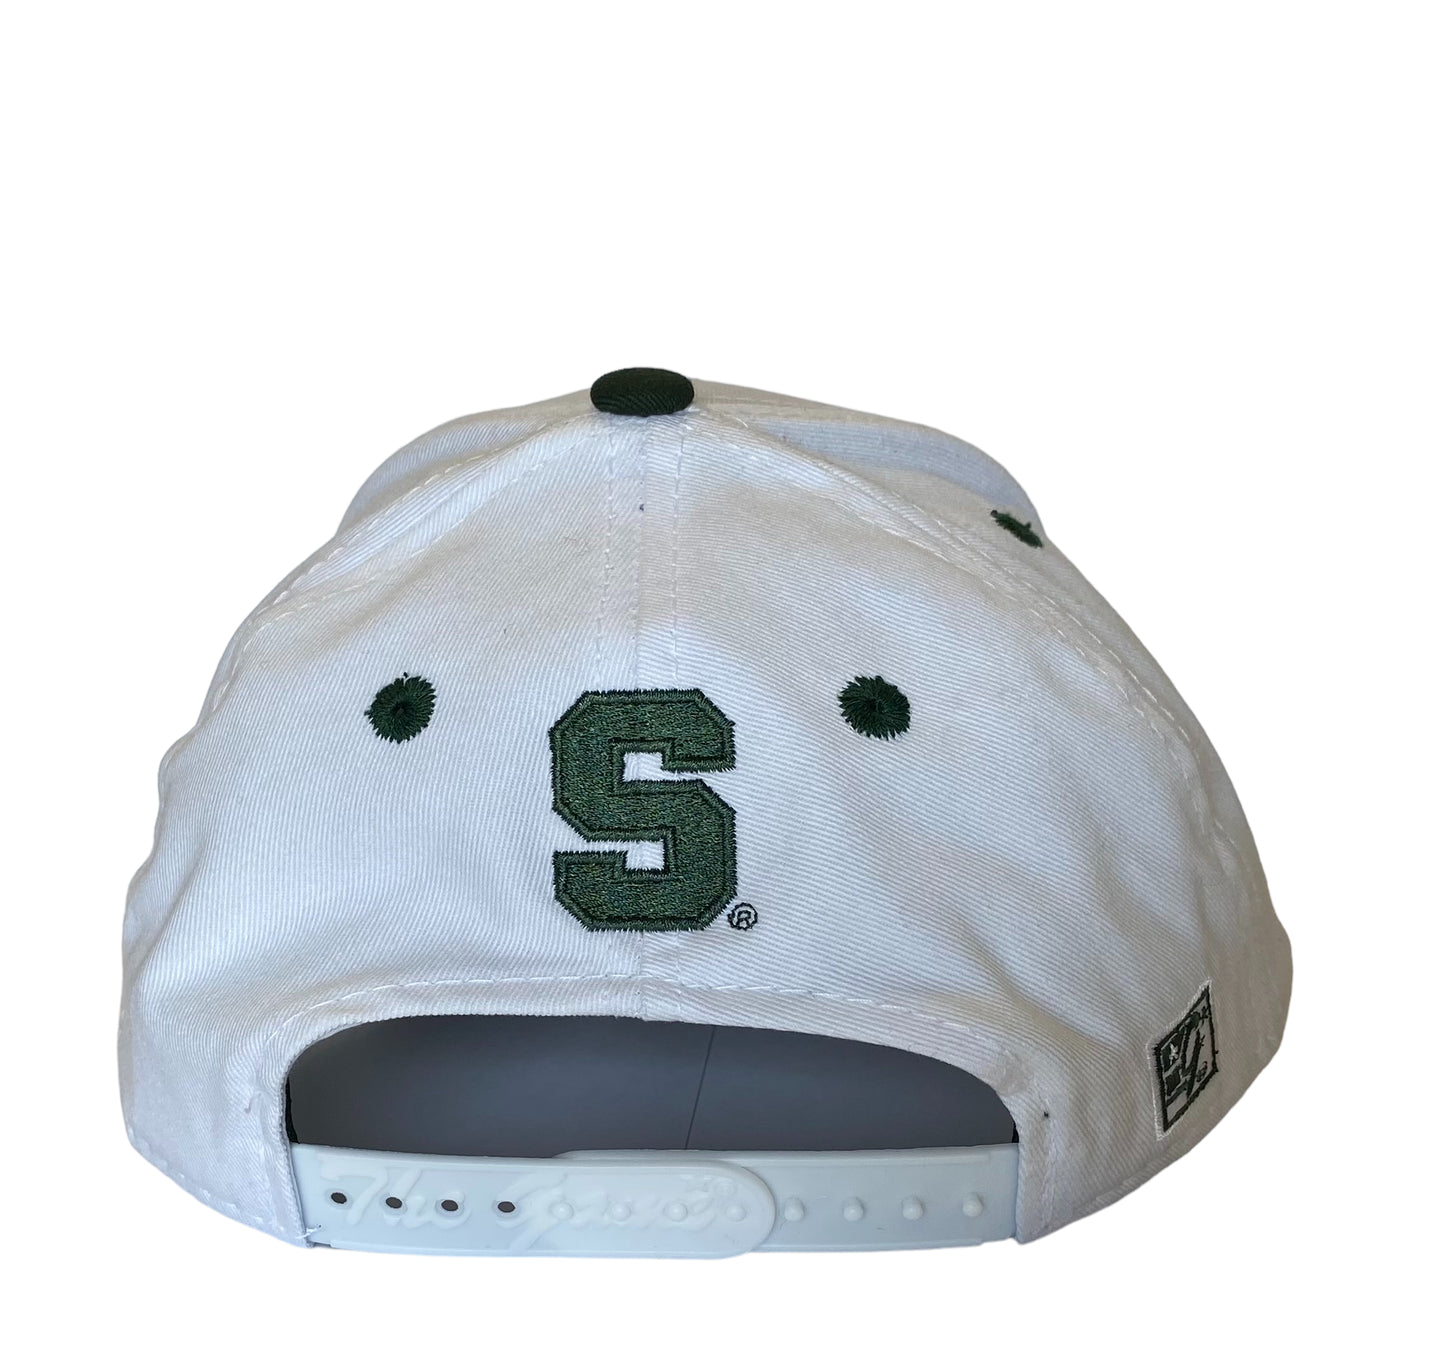 Michigan State Spartans  Adult Gameday Bar Adjustable Hat - White